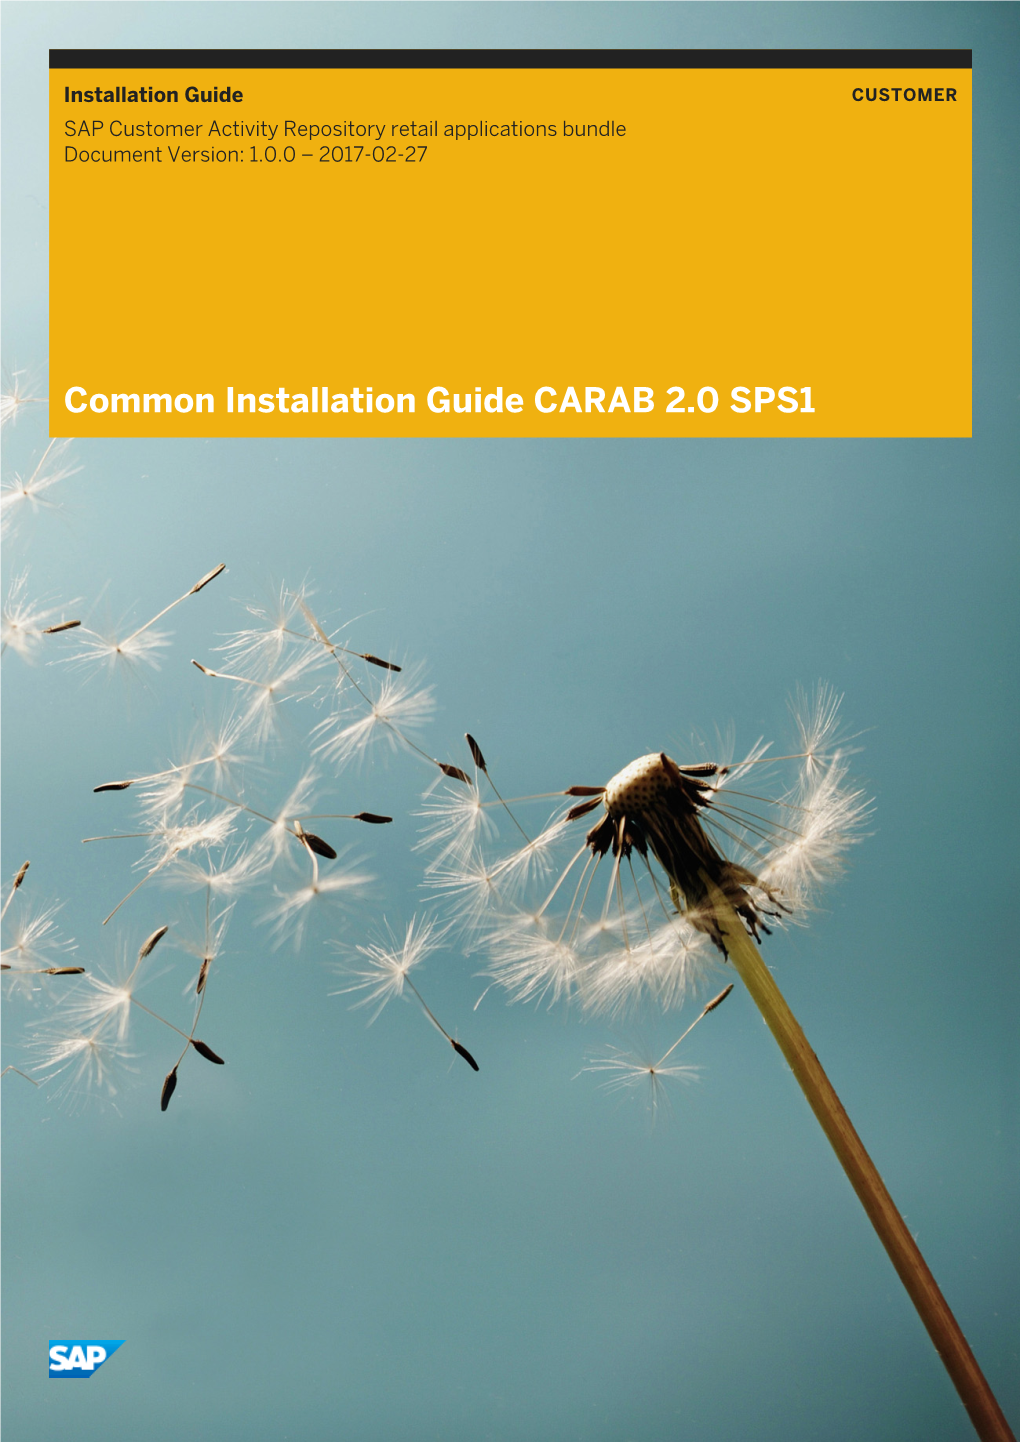 Common Installation Guide CARAB 2.0 SPS1 Content